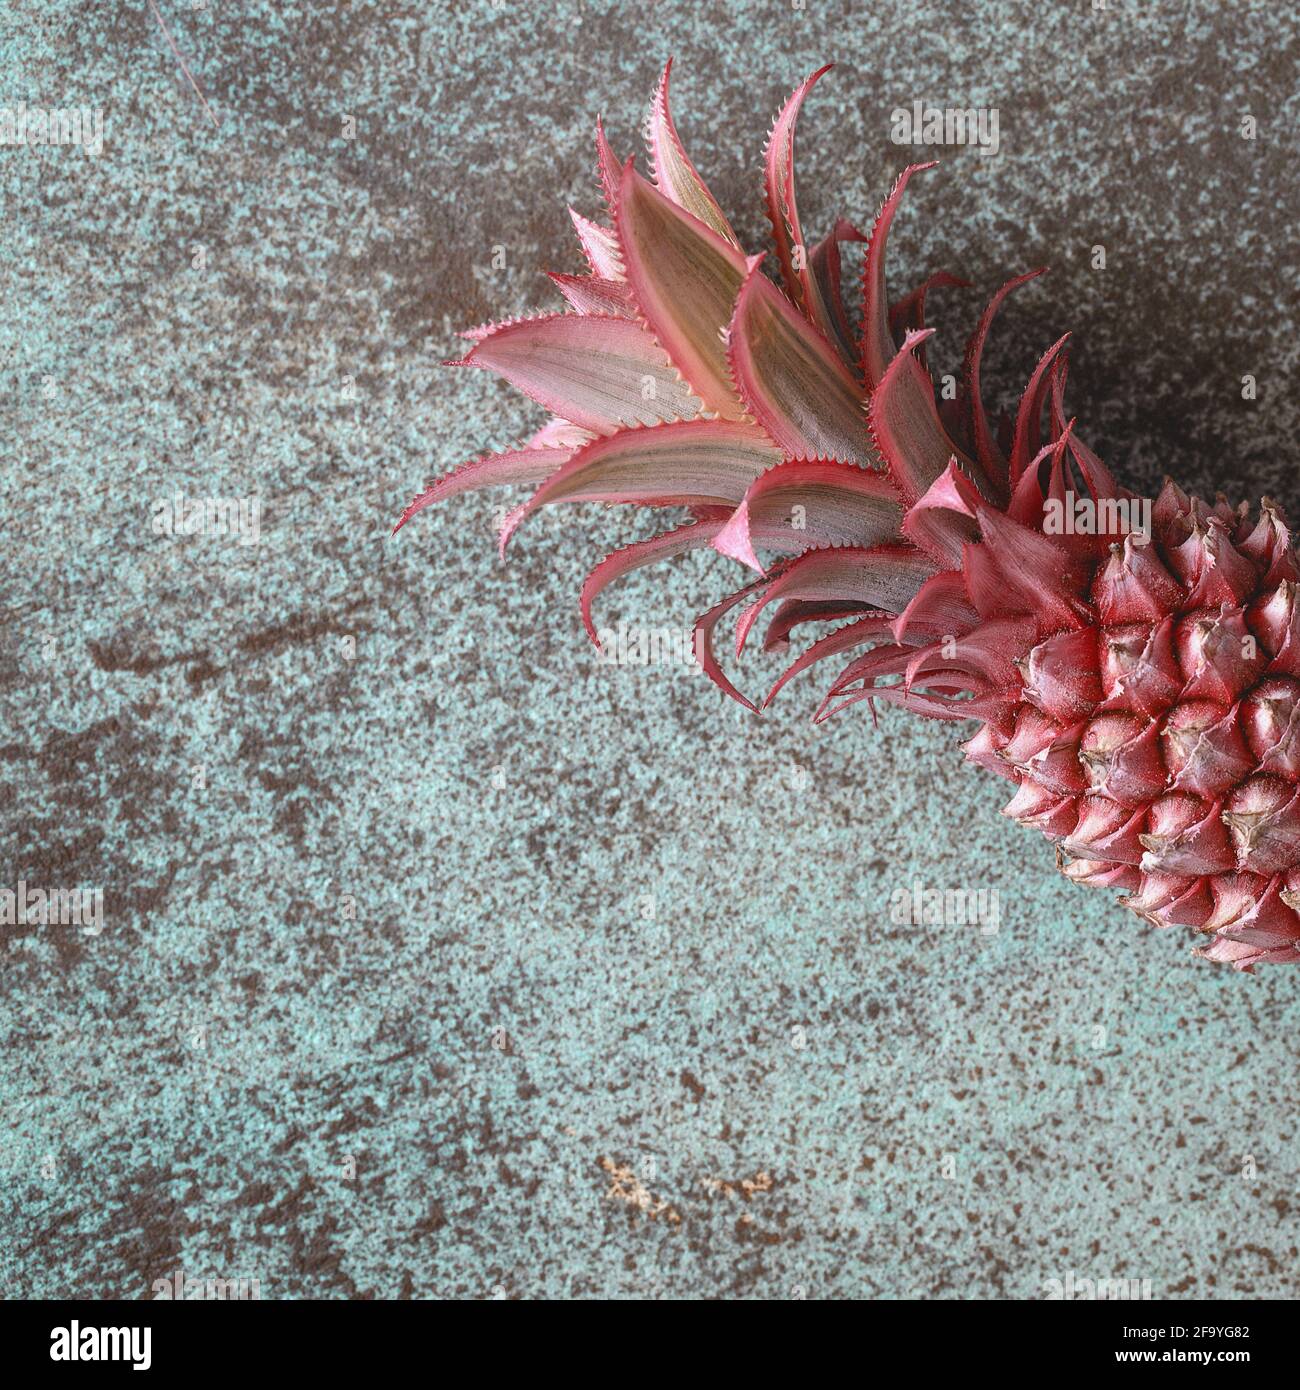 Decorative pink pineapple on turquoise background from above. Exotic floral design background Stock Photo